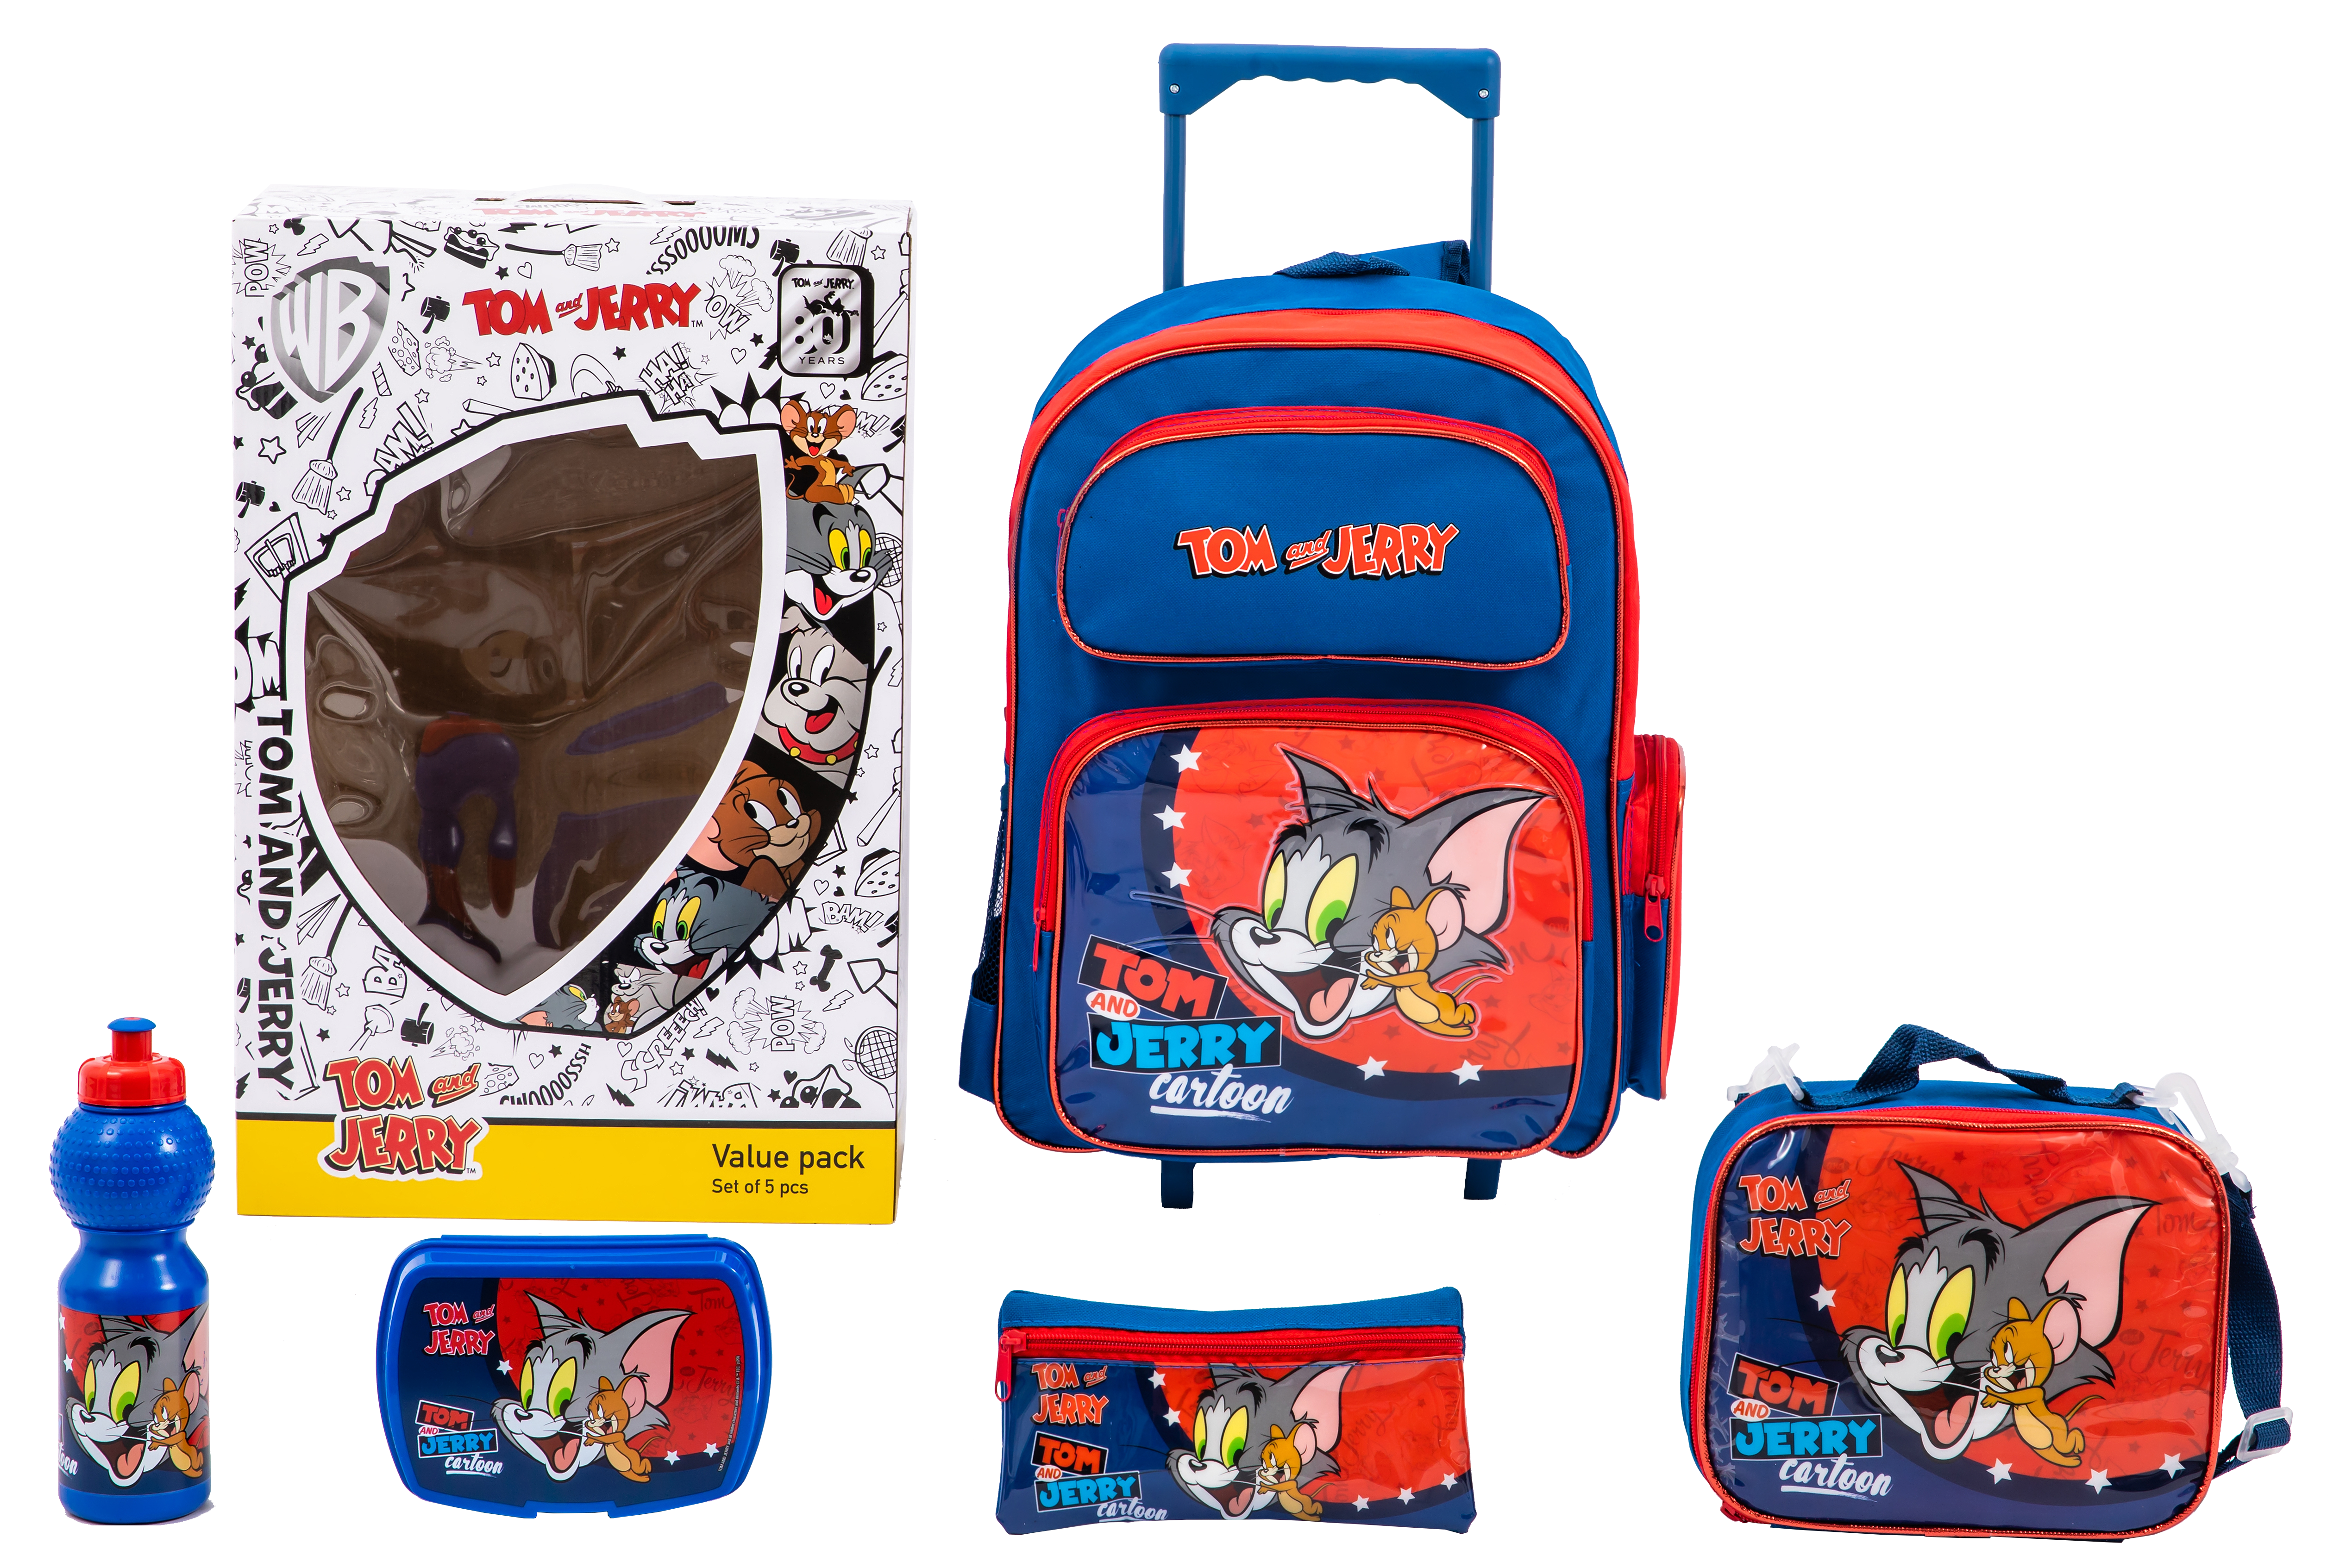 Tom & Jerry - Value Pack 5 in 1